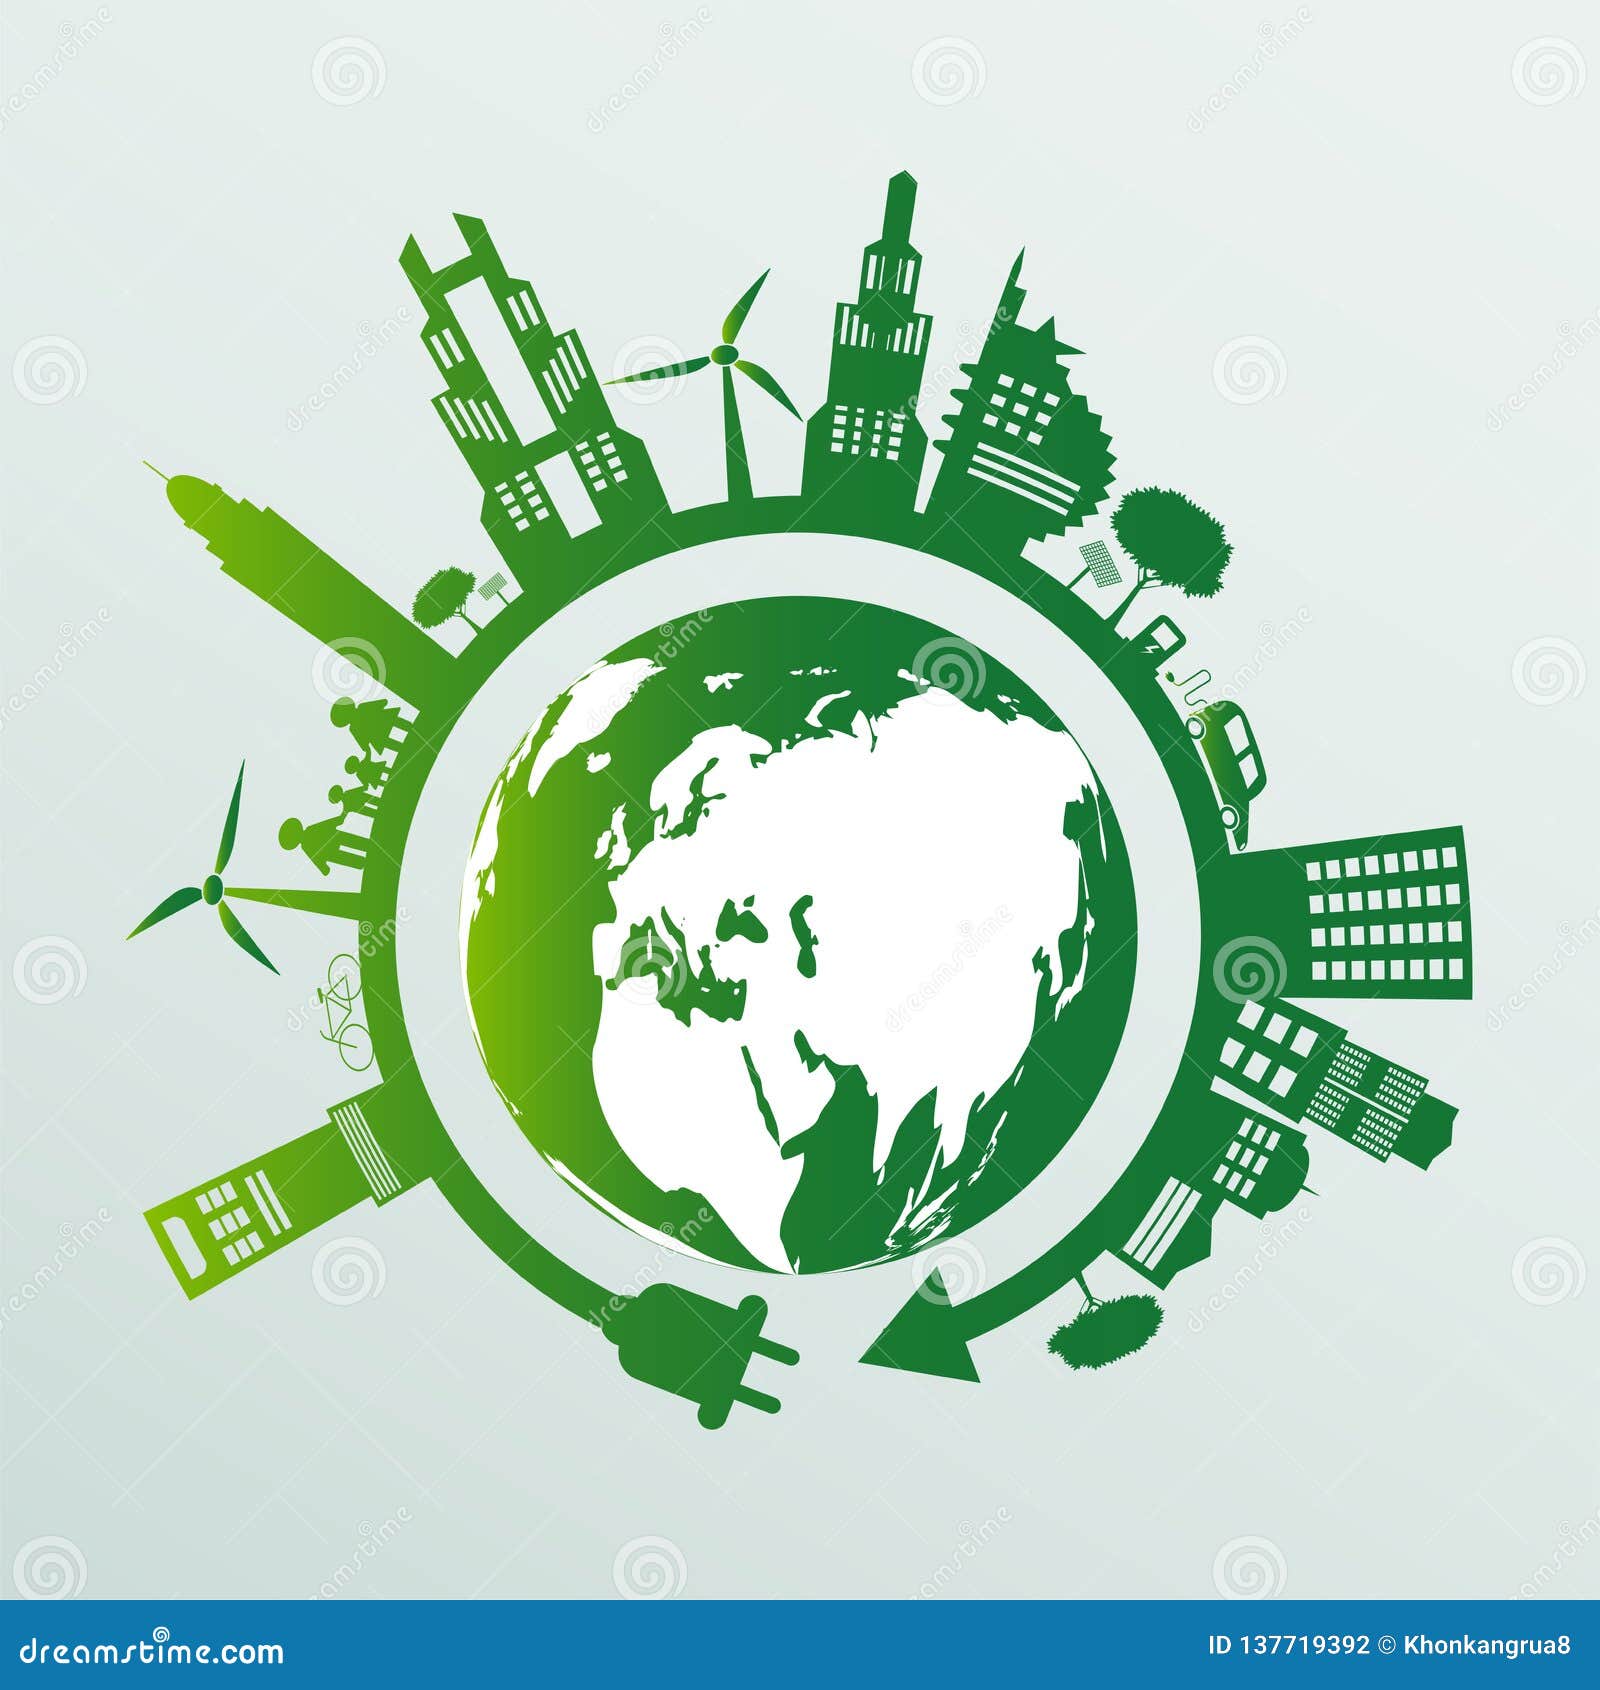 ecology.green cities help the world with eco-friendly concept ideas. 